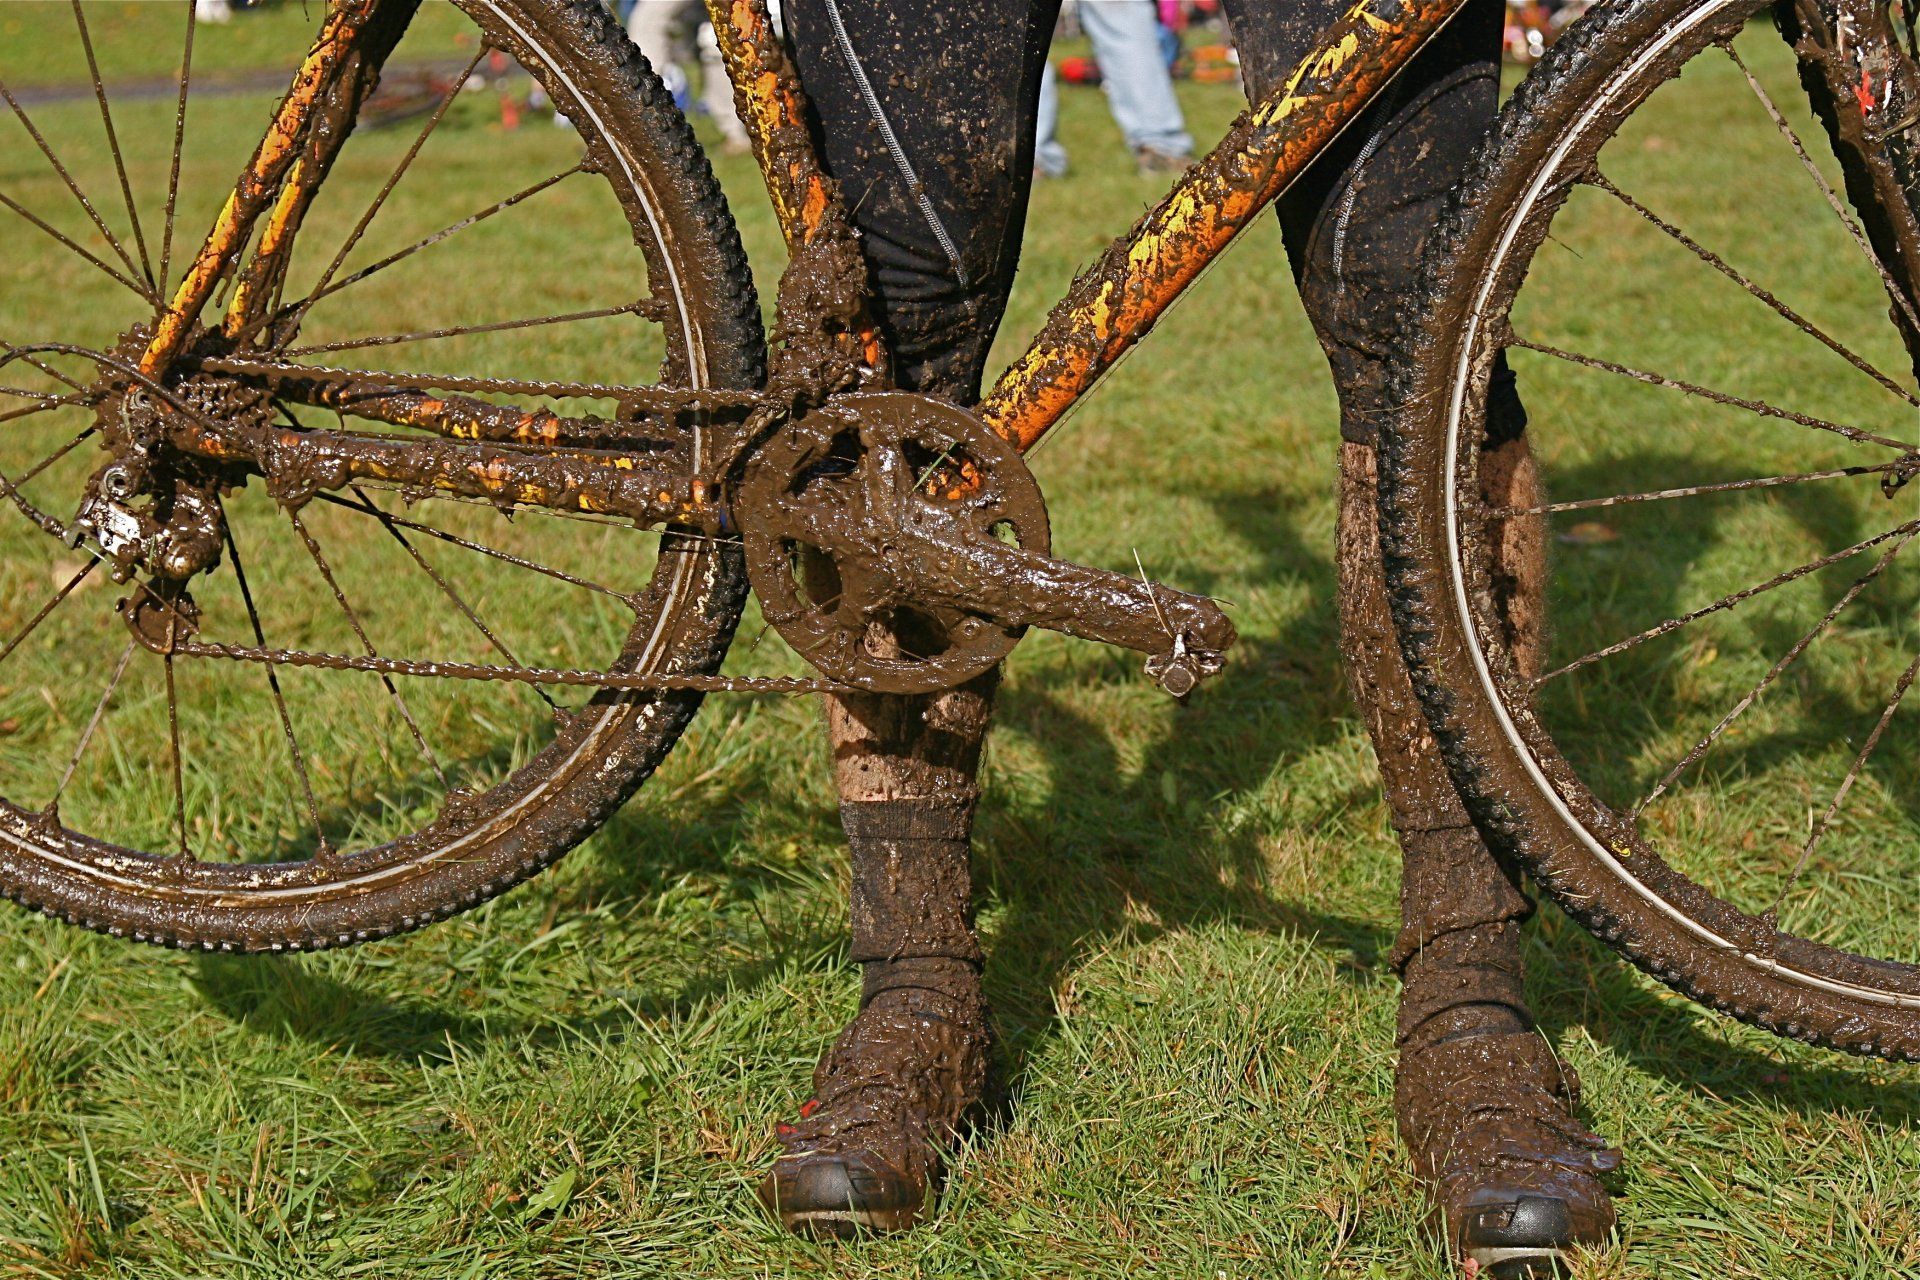 a person is standing next to a muddy bicycle